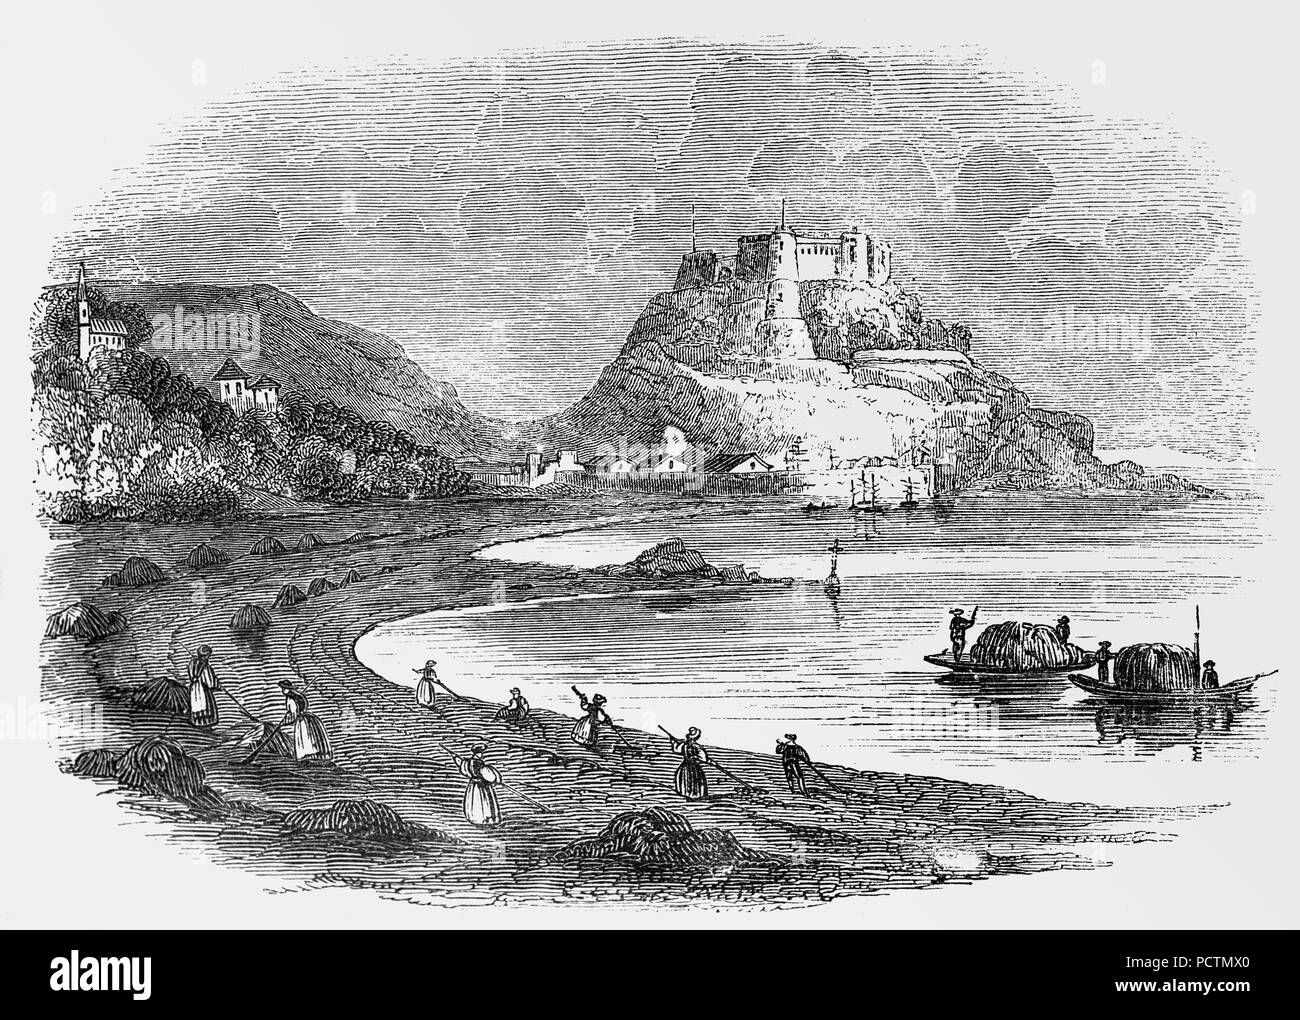 Mont Orgueil in Jersey, Channel Islands, that overlooks the harbour of Gorey. It was the primary defence of Jersey until the development of gunpowder which then rendered the castle ultimately indefensible from Mont Saint Nicholas, the adjacent hill which overlooks the castle. It was  superseded by Elizabeth Castle off Saint Helier, the construction of which commenced at the end of the 16th century. Walter Raleigh, Governor of Jersey in 1600, rejected a plan to demolish the old castle to recycle the stone for the new fortifications with the words: ''twere pity to cast it down'. Stock Photo